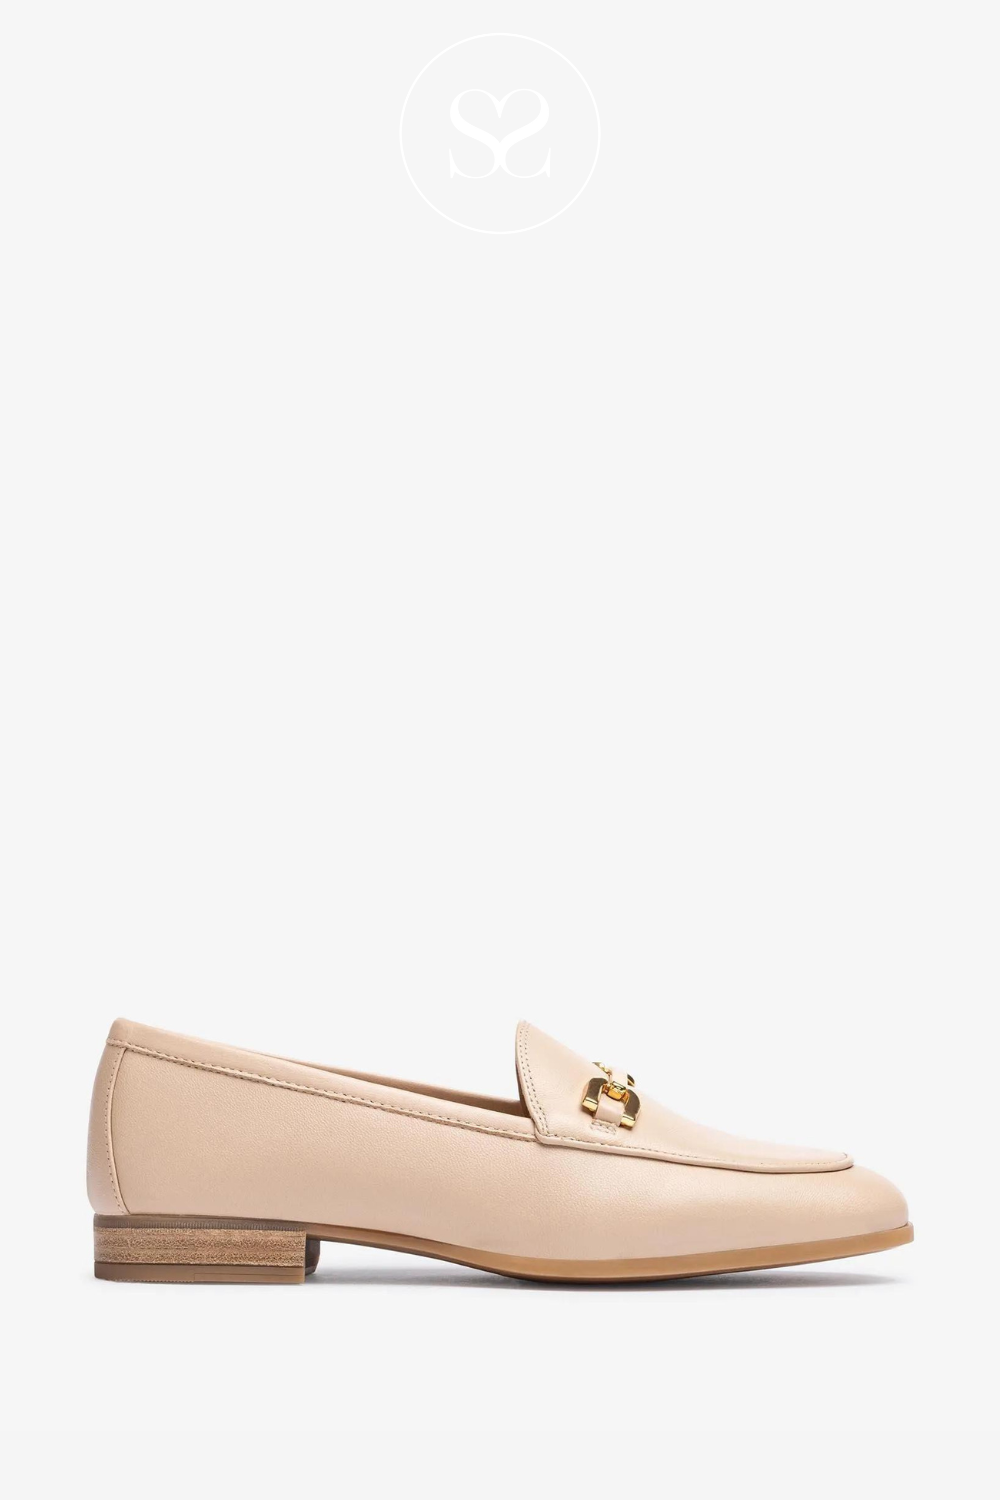 UNISA DALCY NUDE LEATHER FLAT LOAFERS